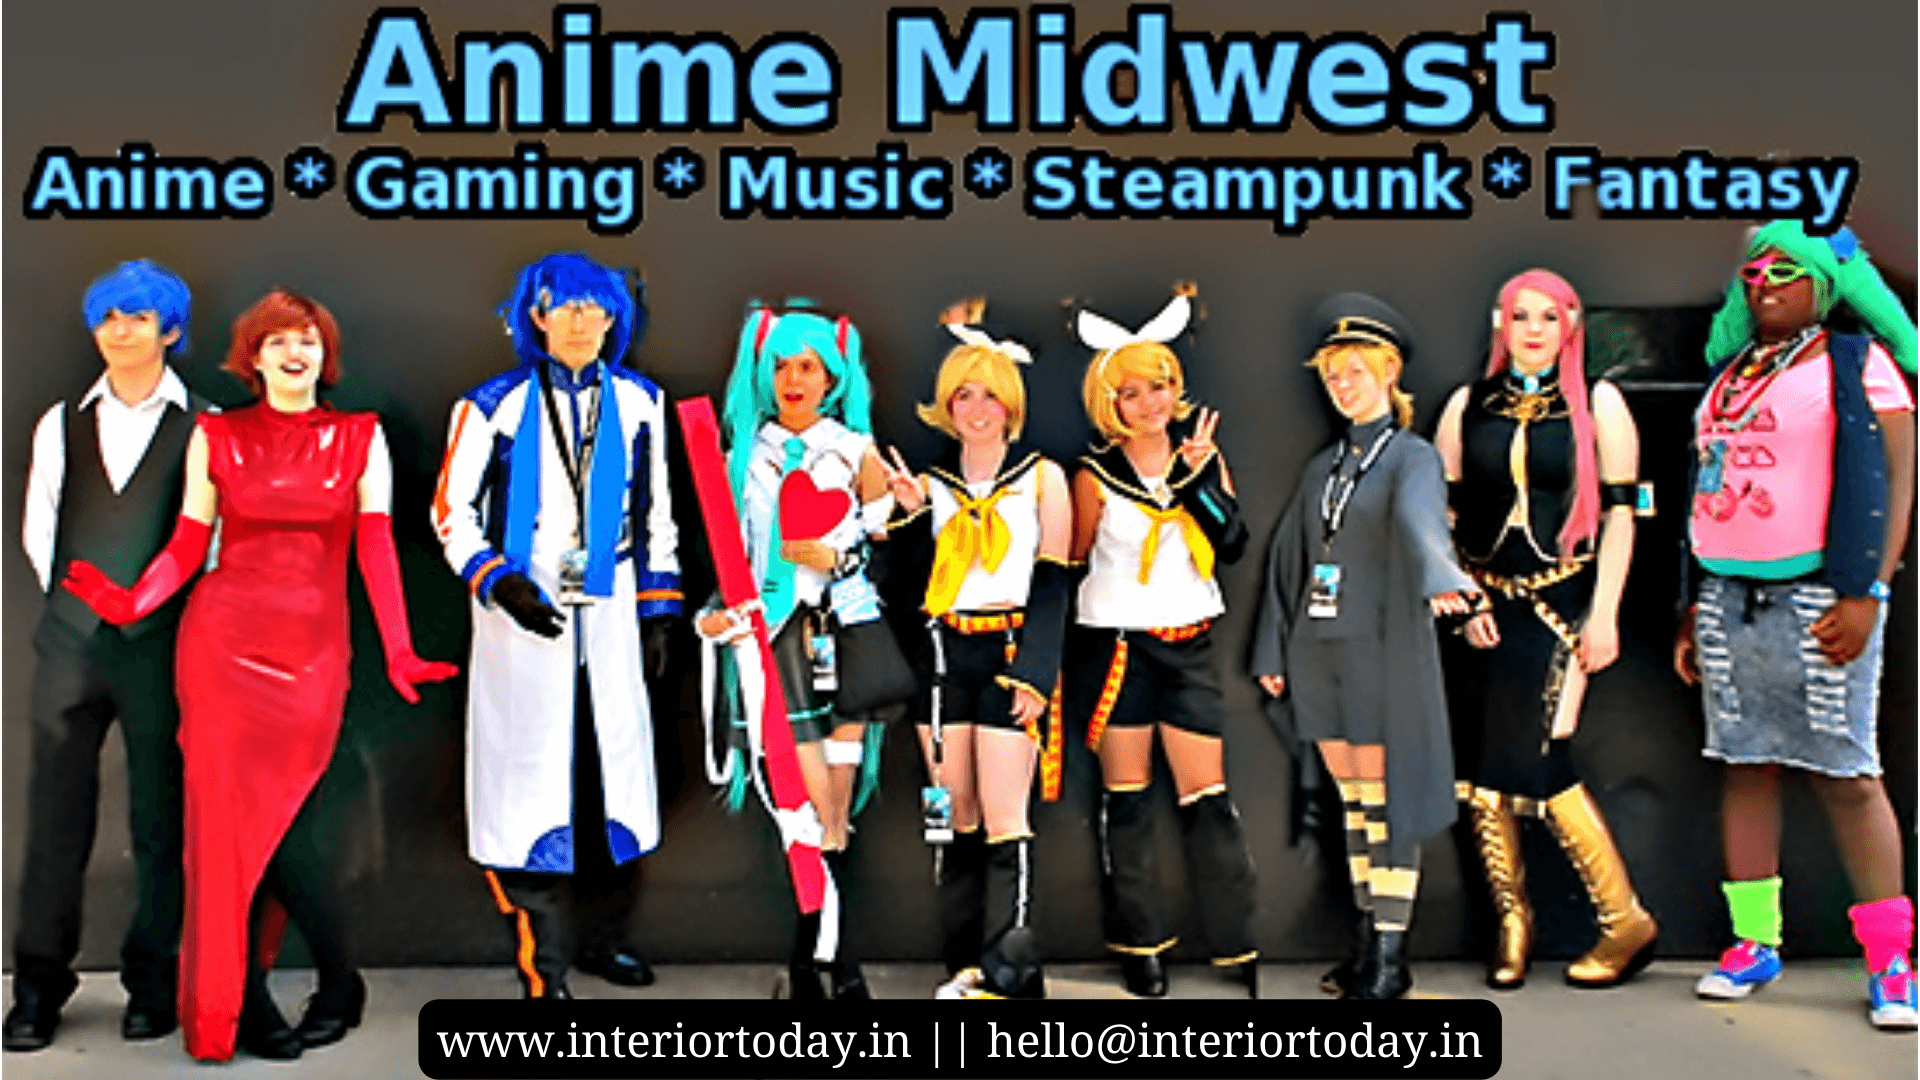 anime midwest 2022 exhibition stand builder